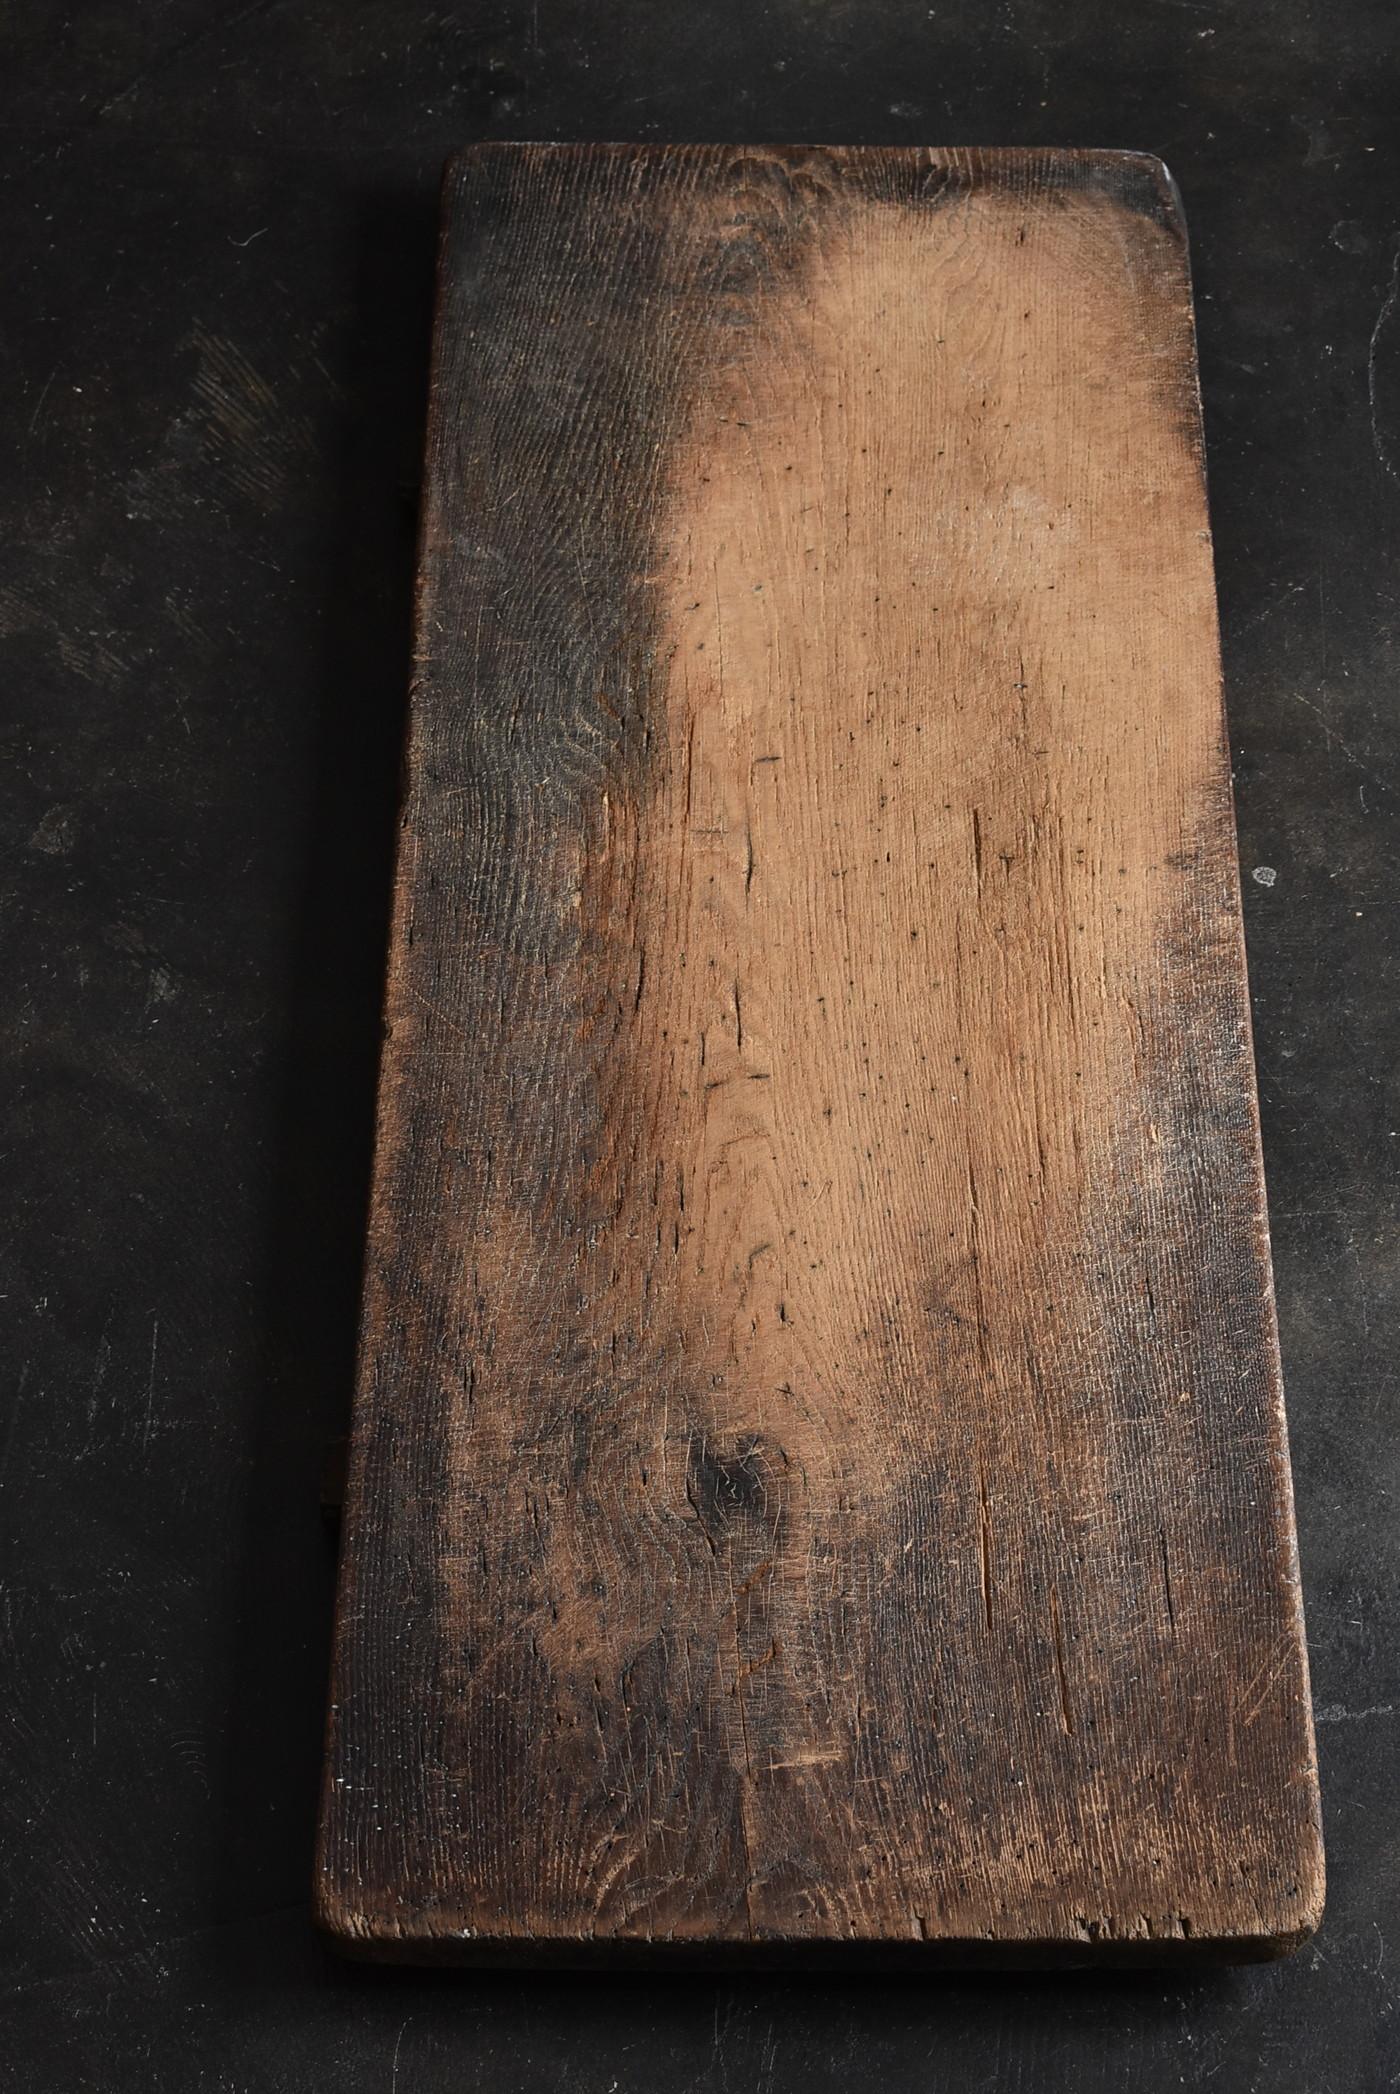 19th-20th Century Japanese Old Antique wooden Boards like Monochrome Paintings 10